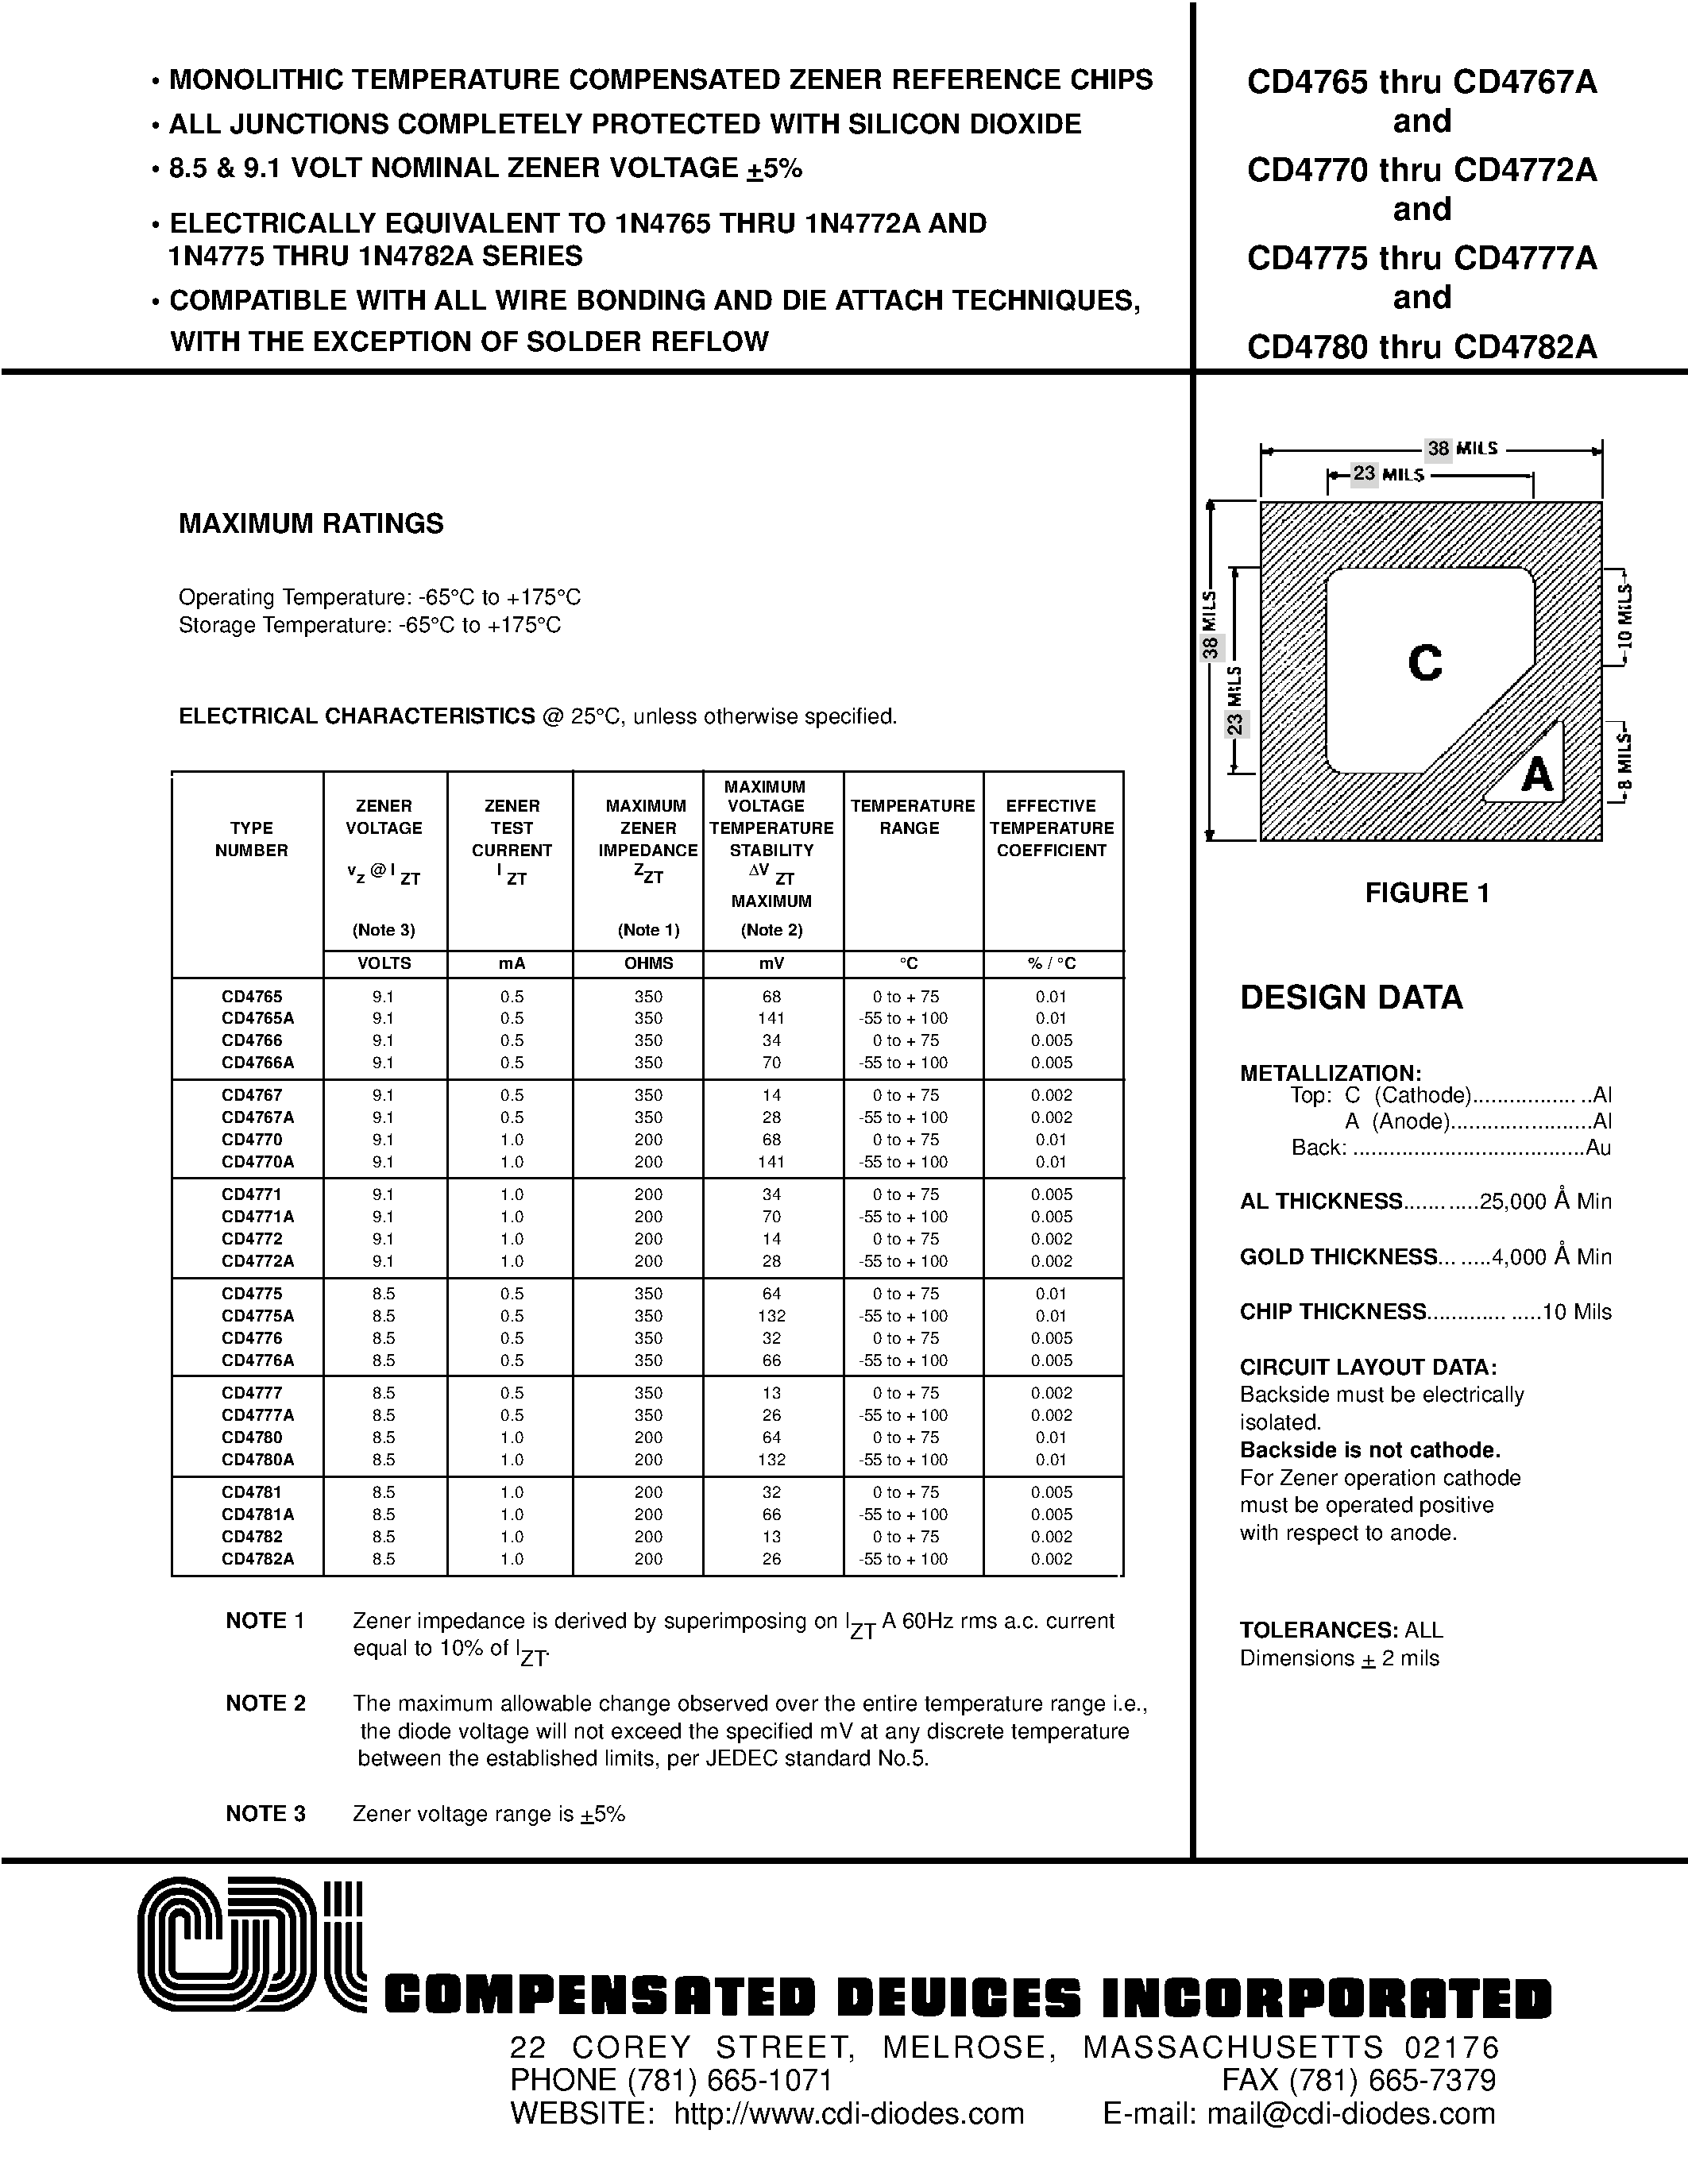 Datasheet CD4775 - MONOLITHIC TEMPERATURE COMPENSATED ZENER REFERENCE CHIPS page 1